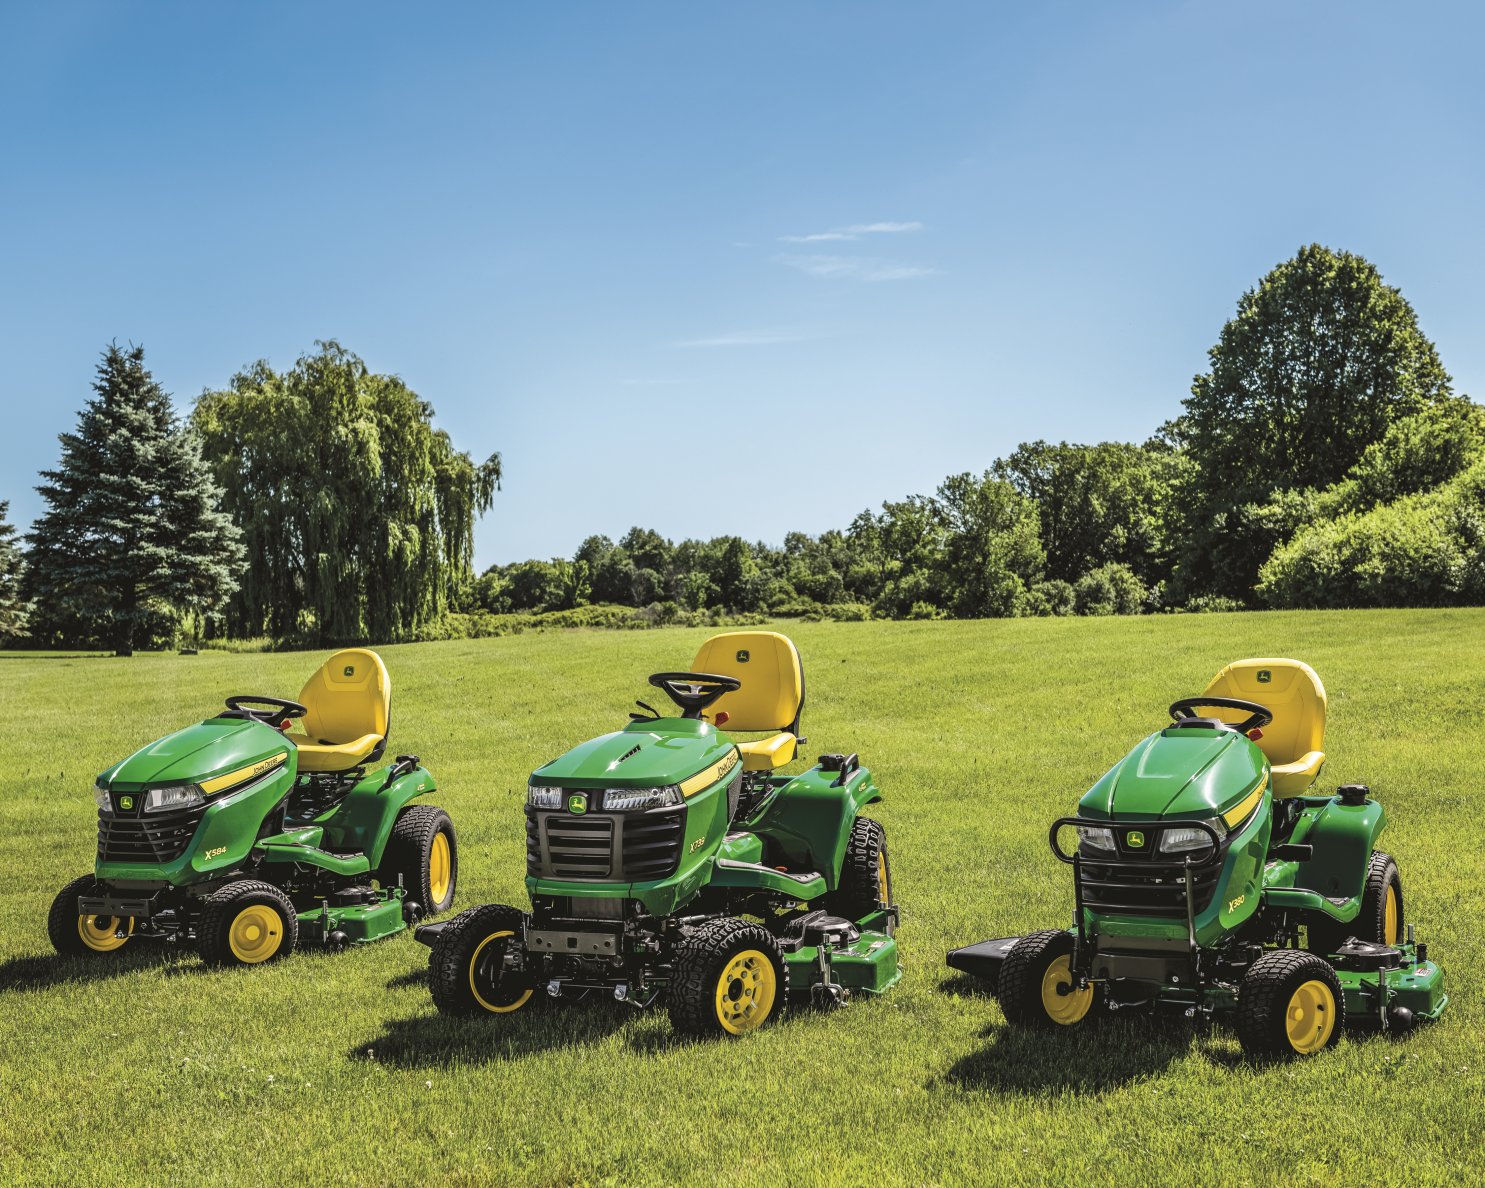 X380, X584, X739 Tractors are displaying on a green lawn